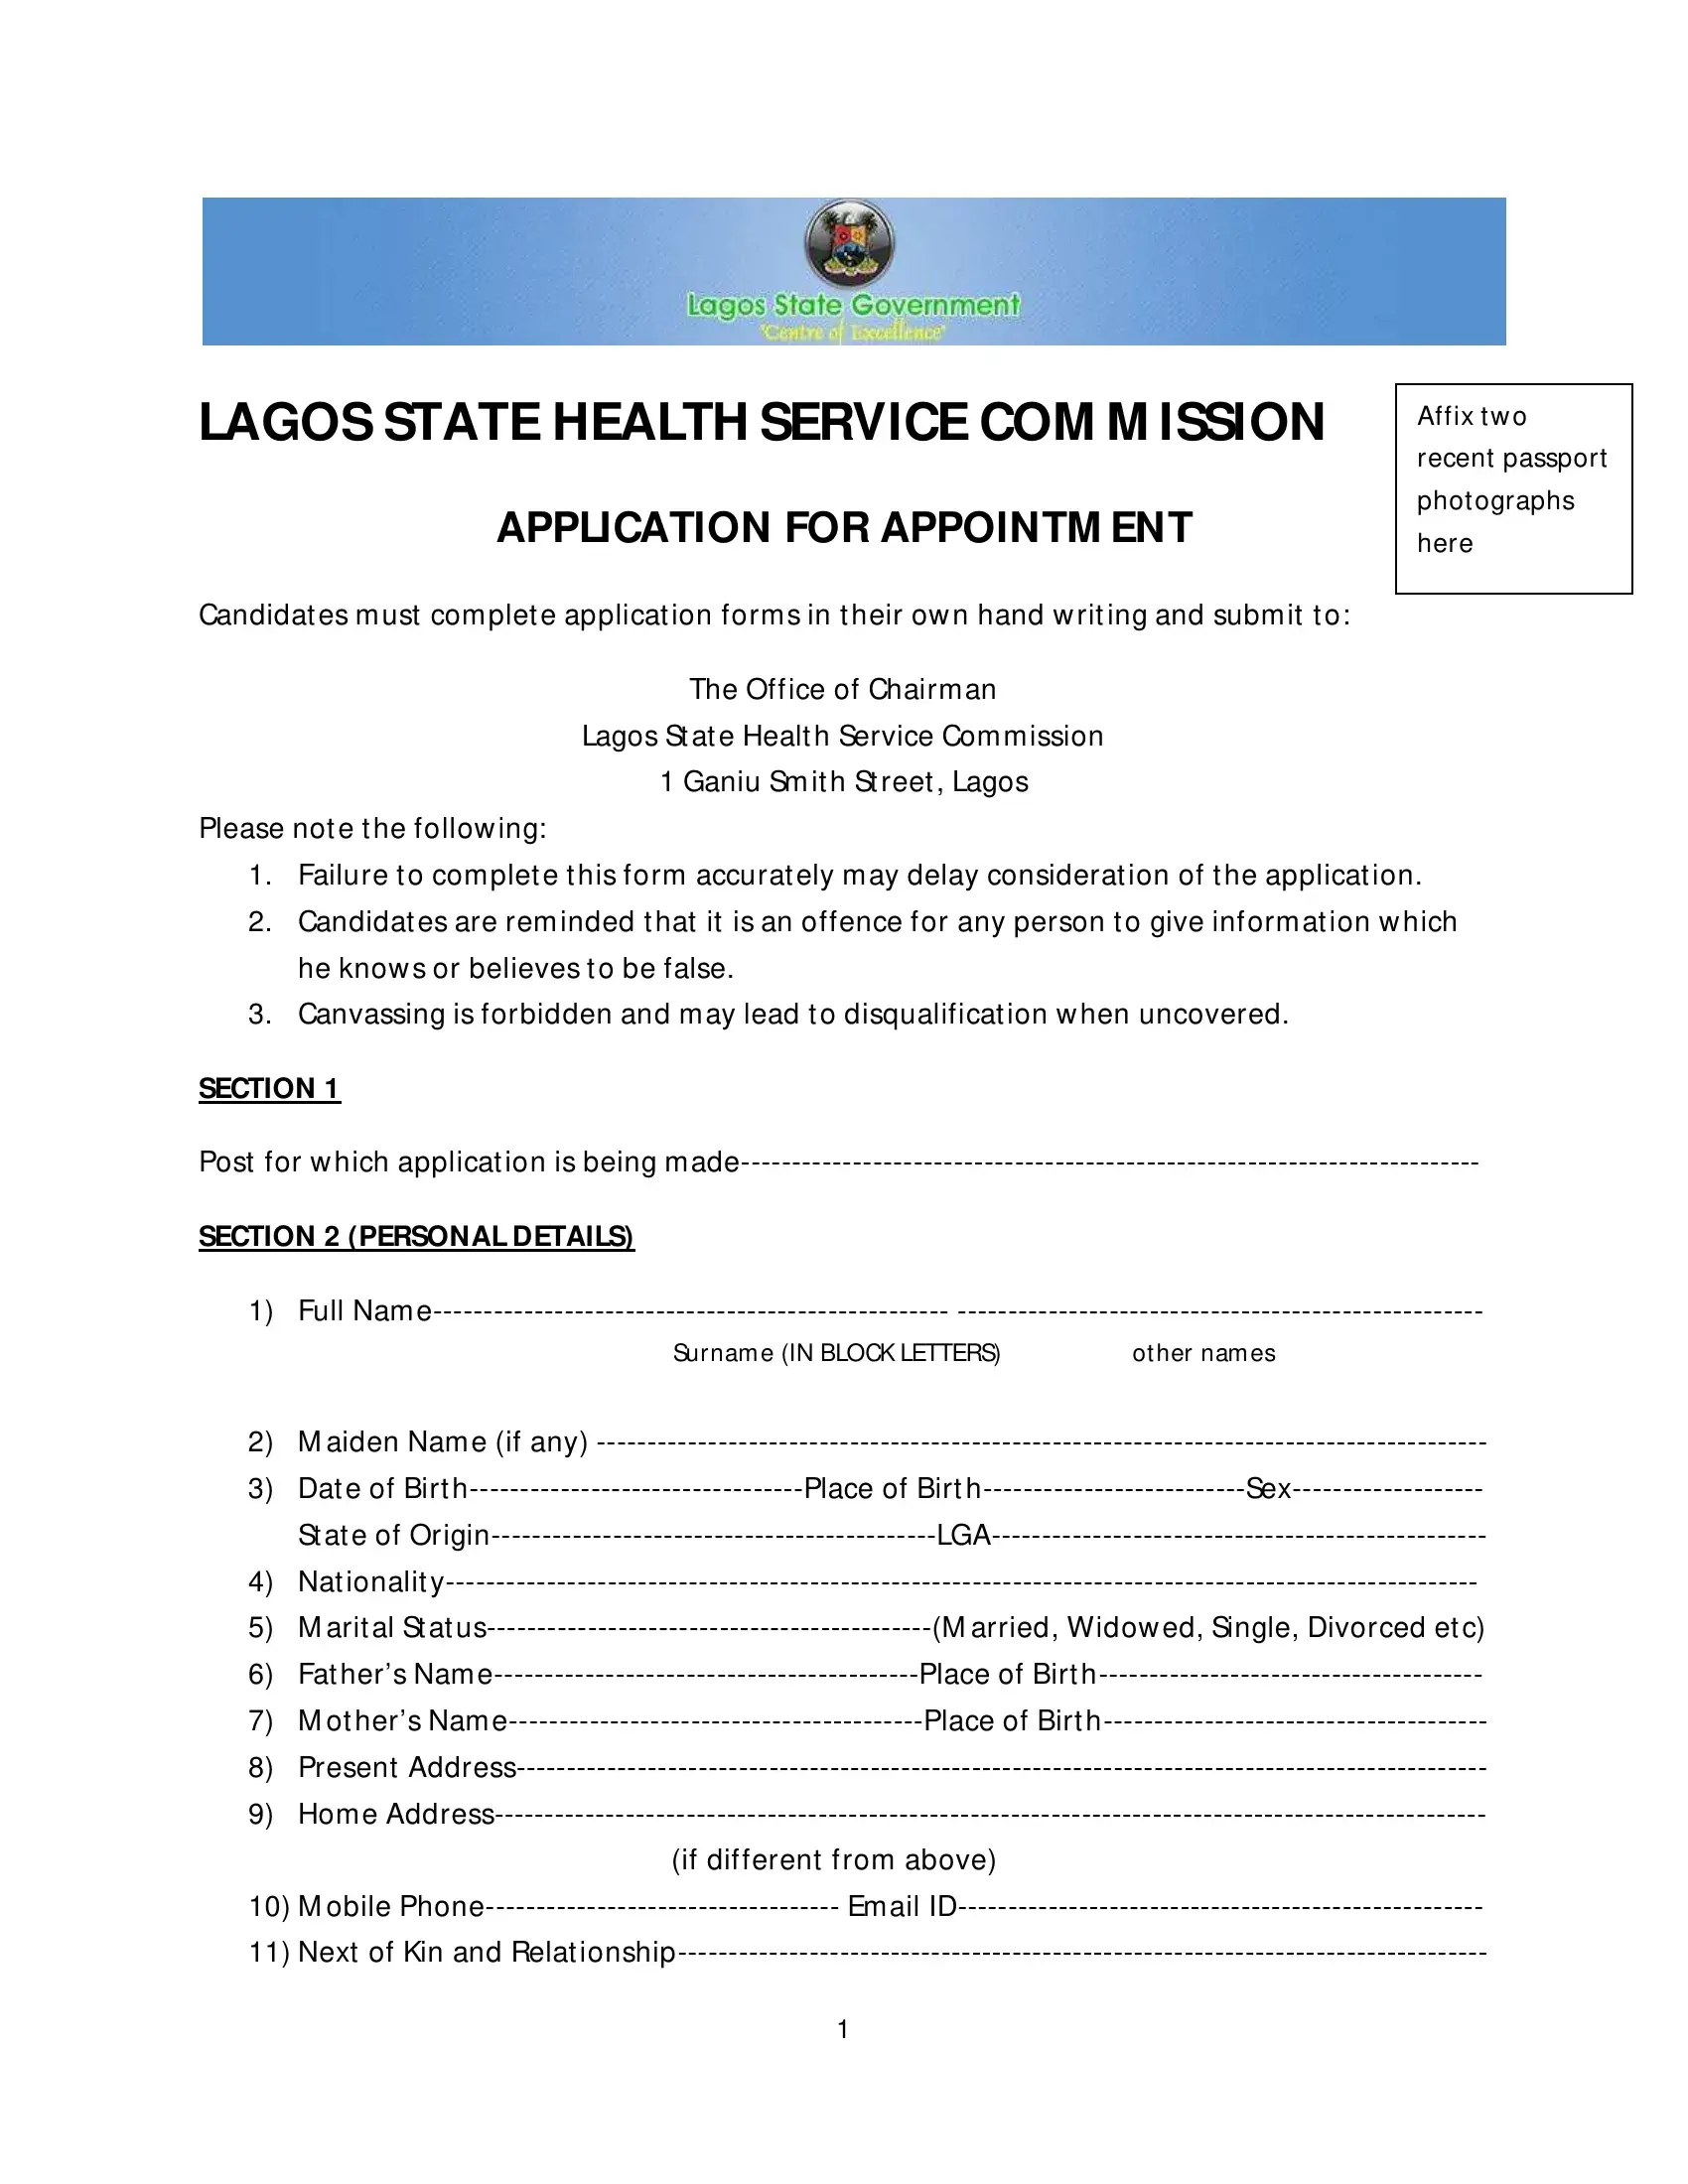 lagos-state-health-service-commission-pdf-form-formspal